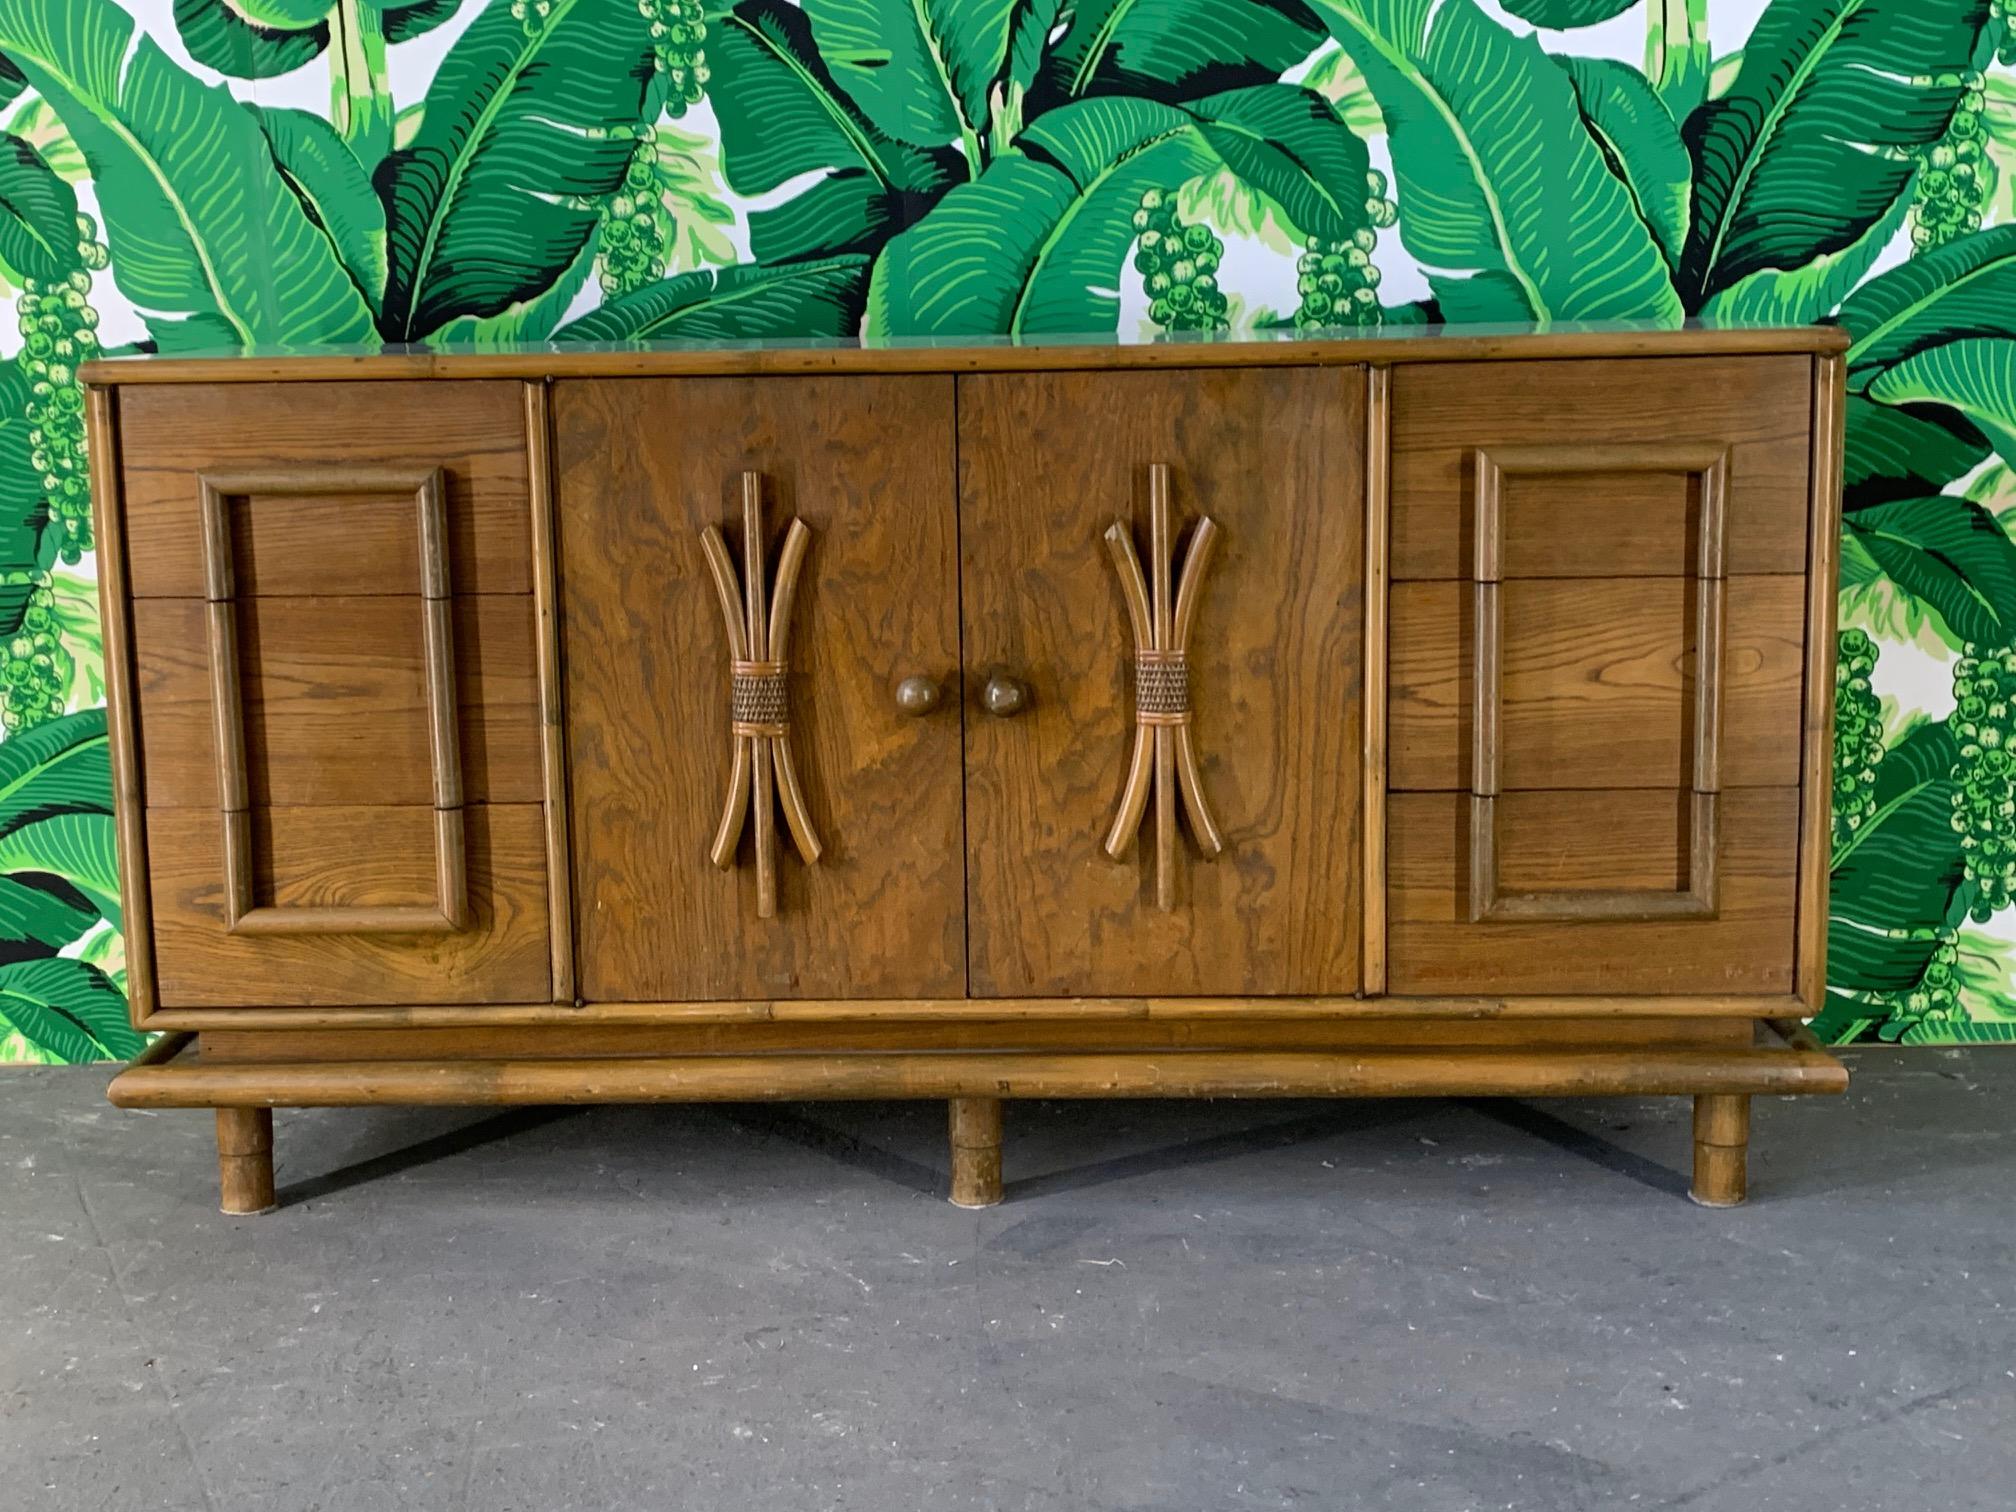 Vintage tiki-style dresser features solid wood construction and rattan detailing in true Polynesian style, circa 1960s. Good vintage condition with imperfections consistent with age.